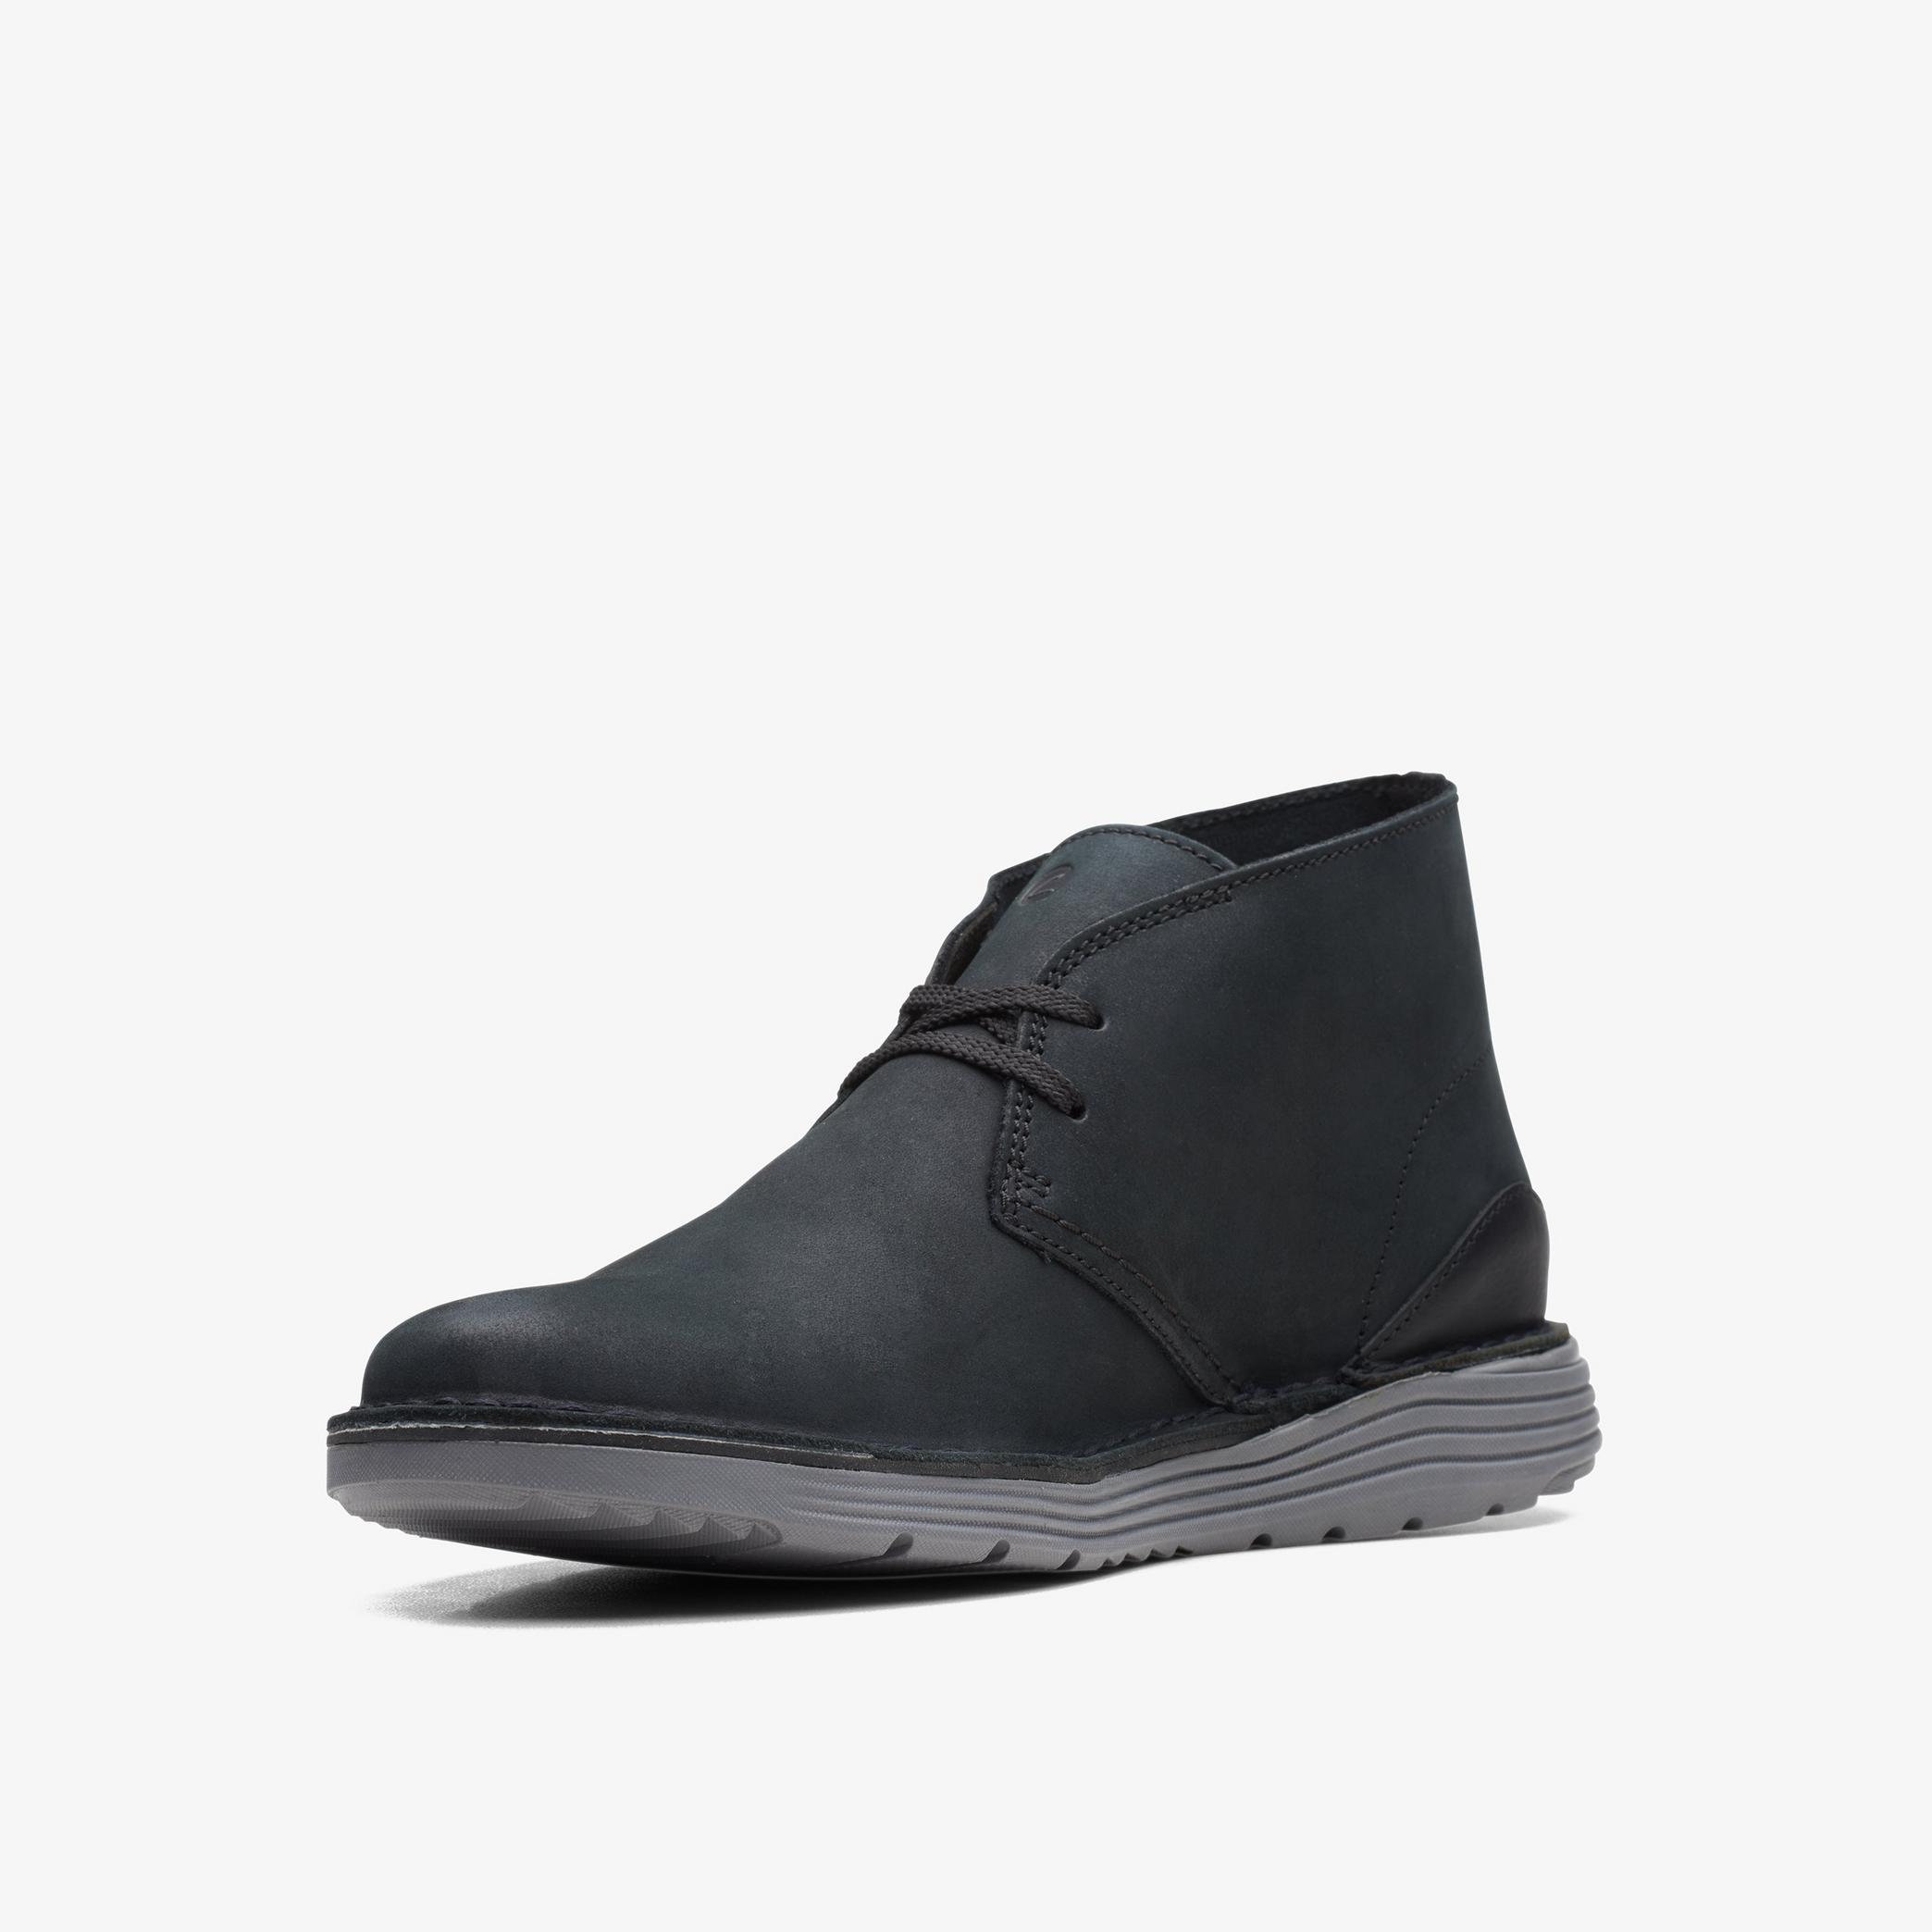 Brahnz Mid Black Nubuck Ankle Boots, view 4 of 6